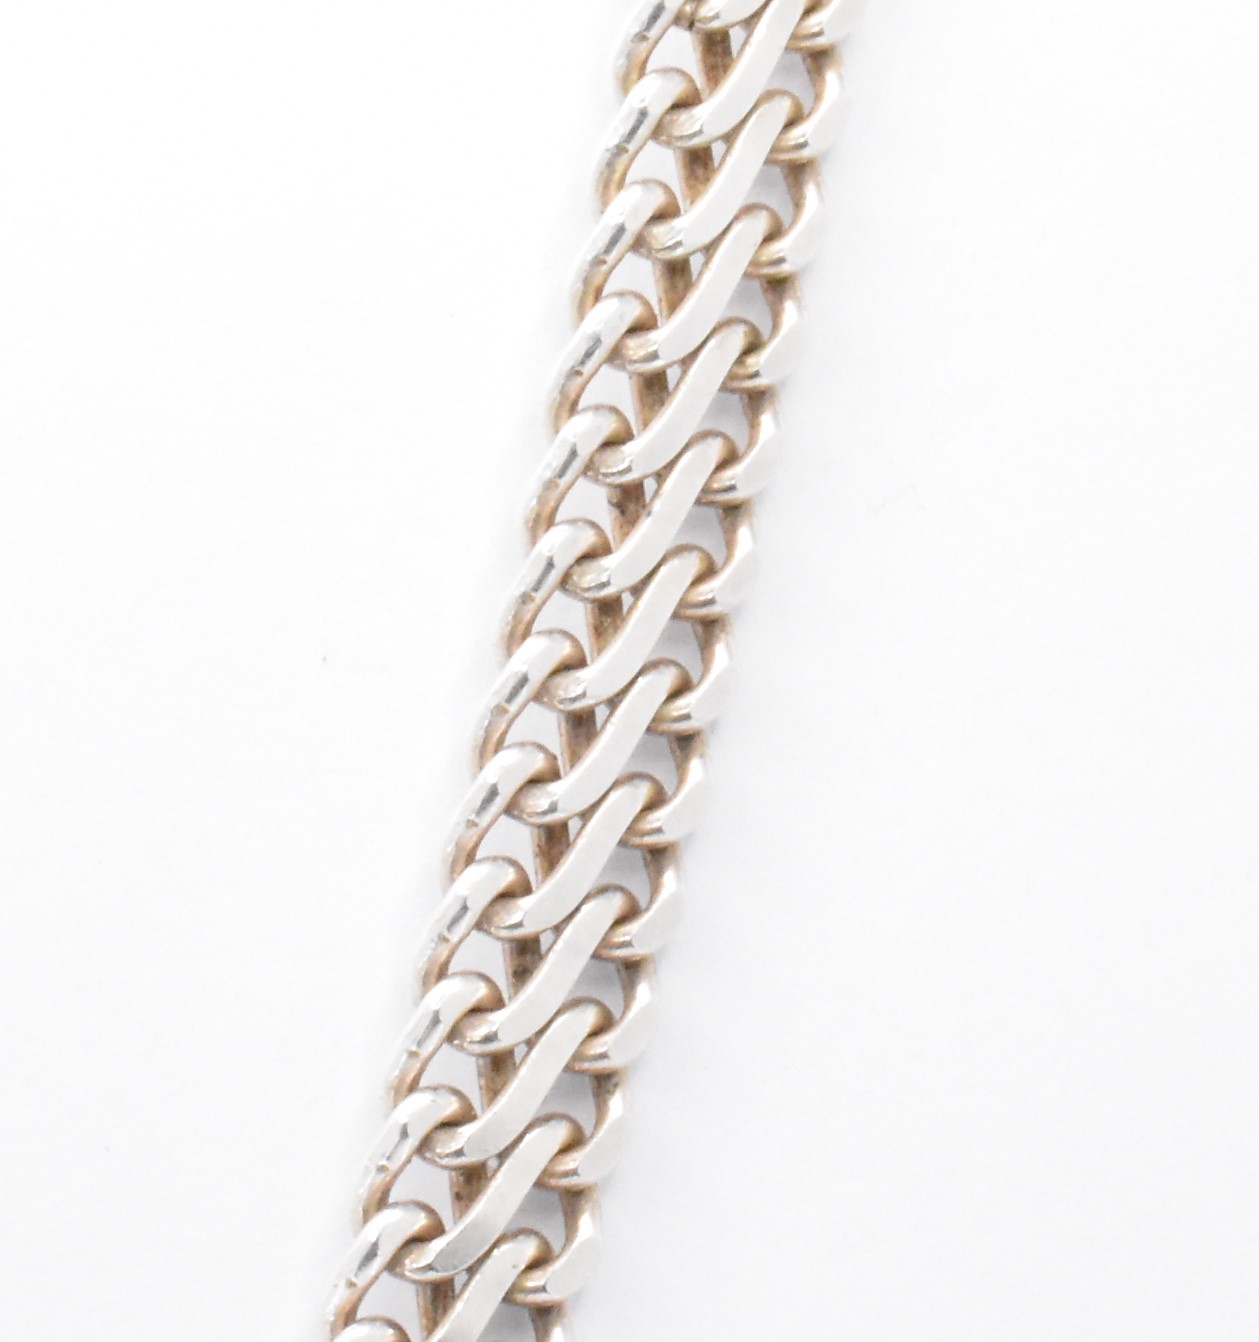 SILVER FANCY LINK NECKLACE CHAIN - Image 3 of 6